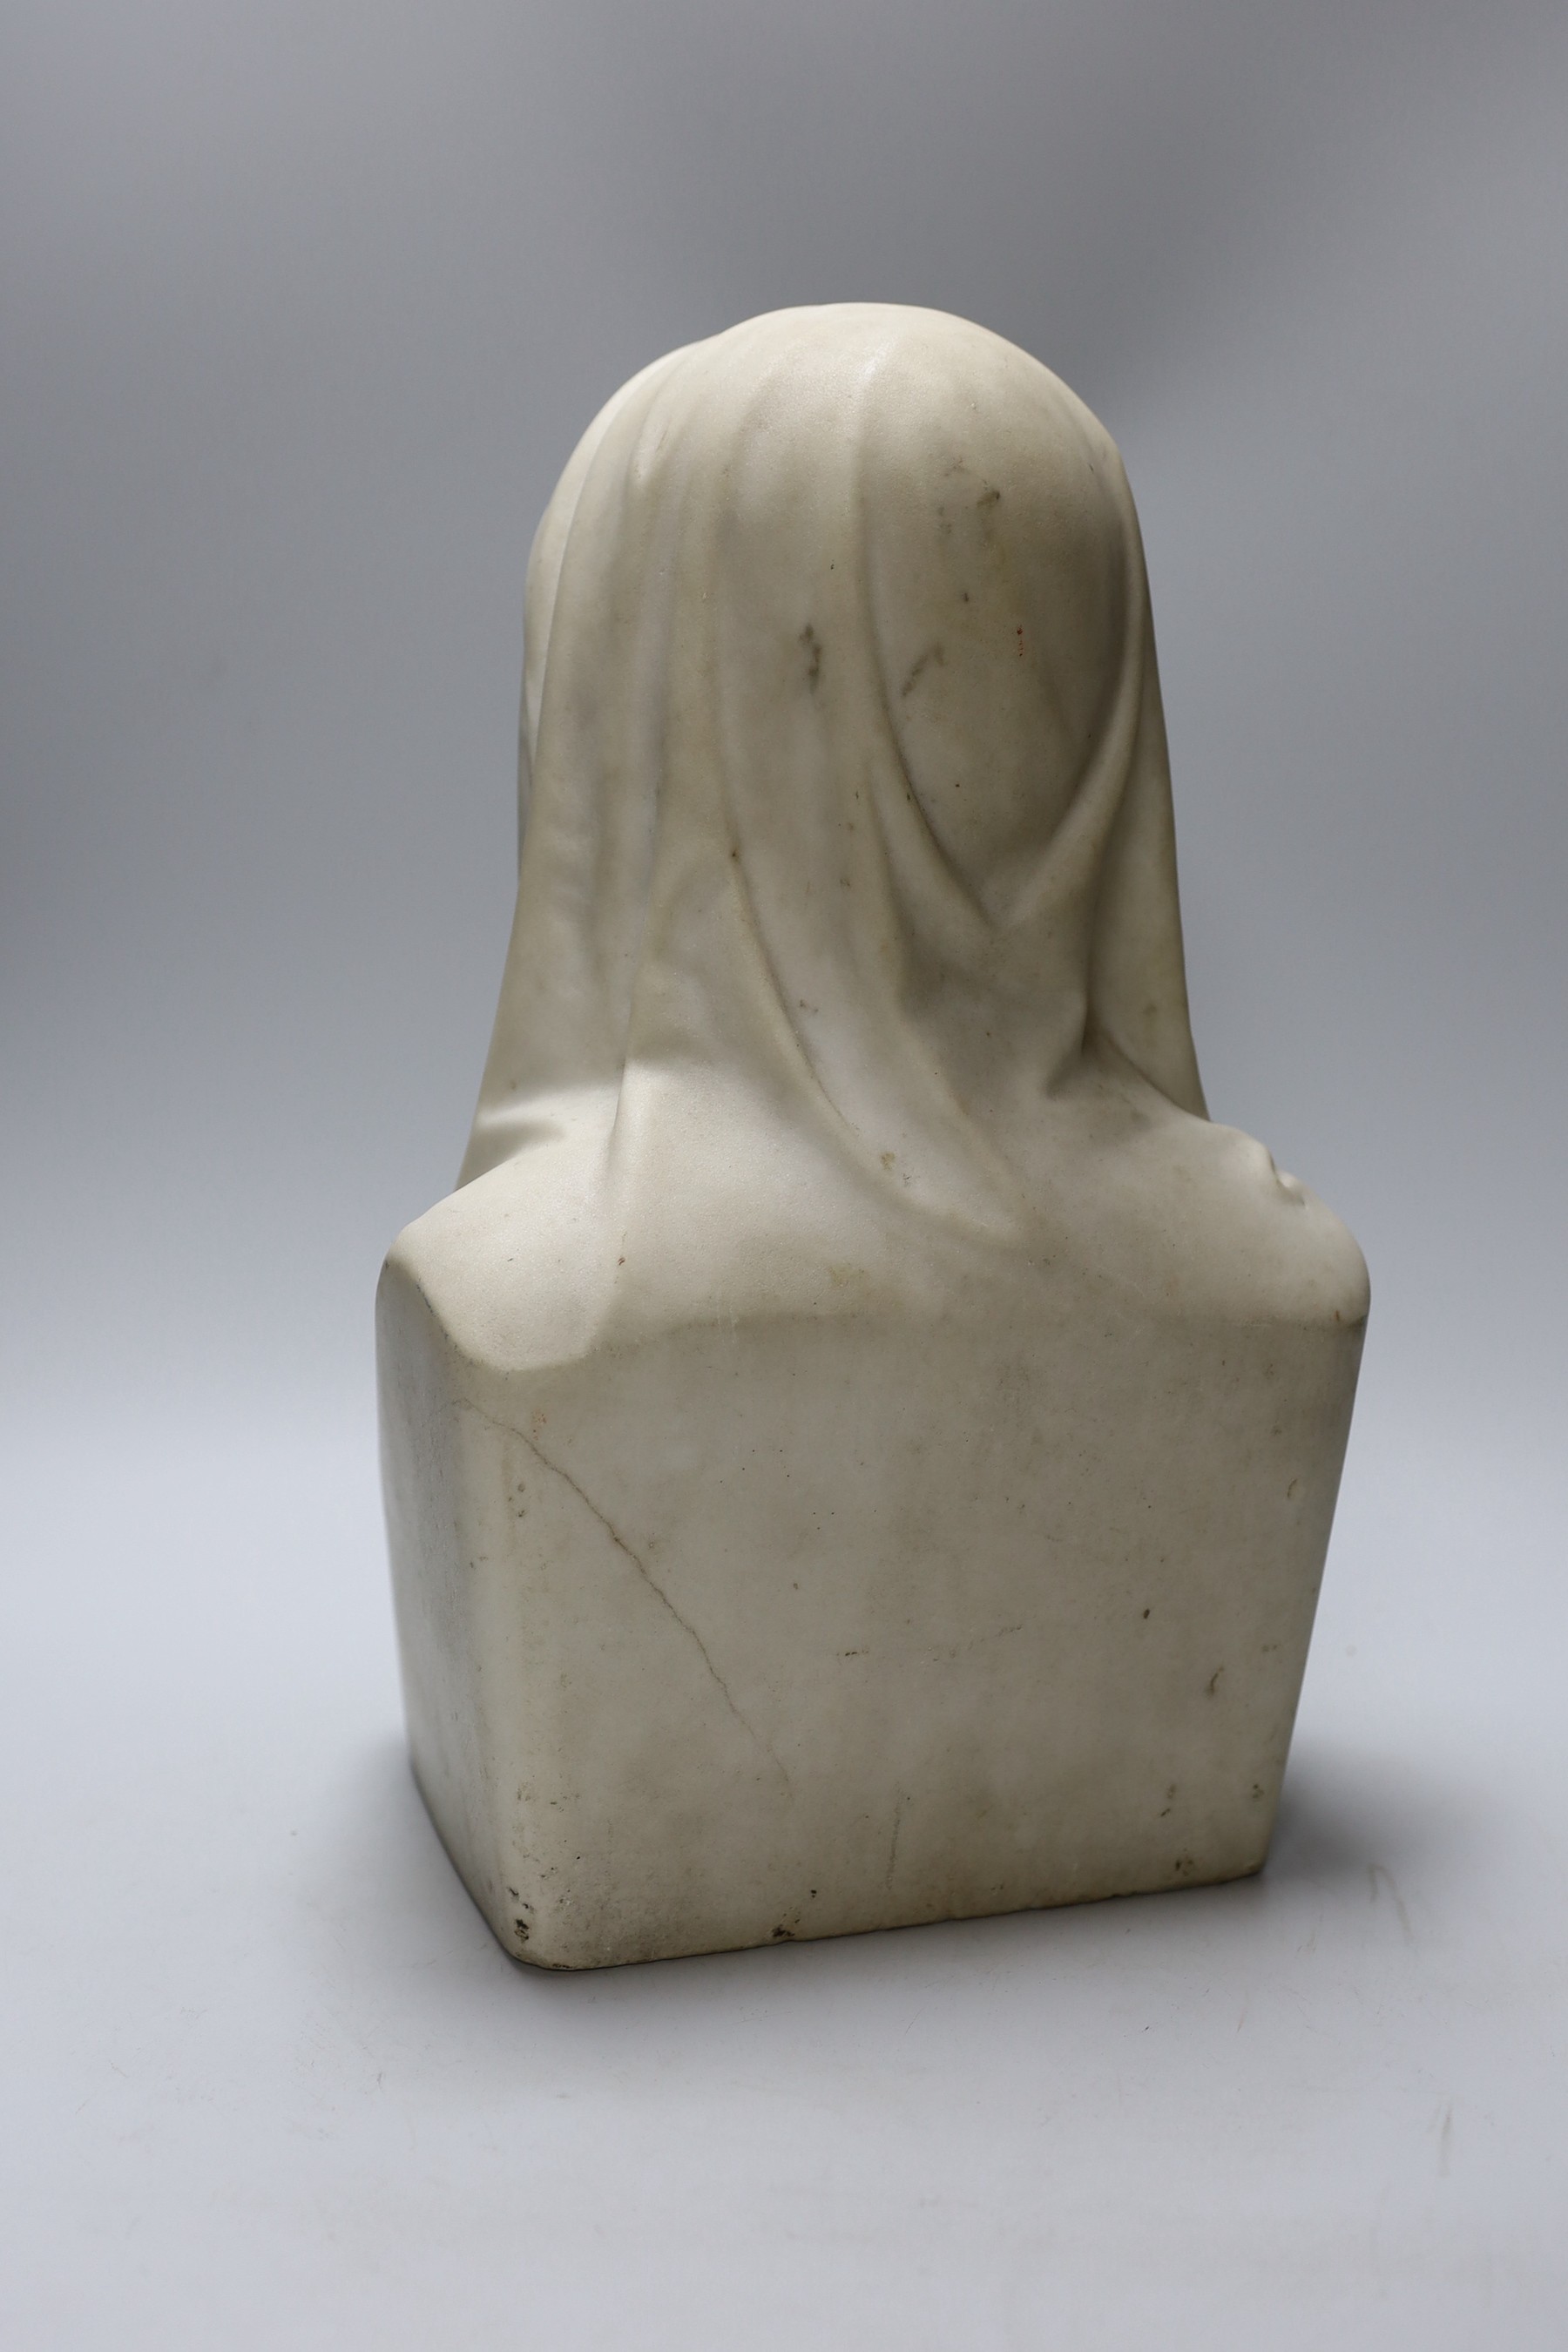 J.S. Westmacott 1866 - a Carrara marble bust of a lady, possibly Florence Nightingale, 36.5cms high